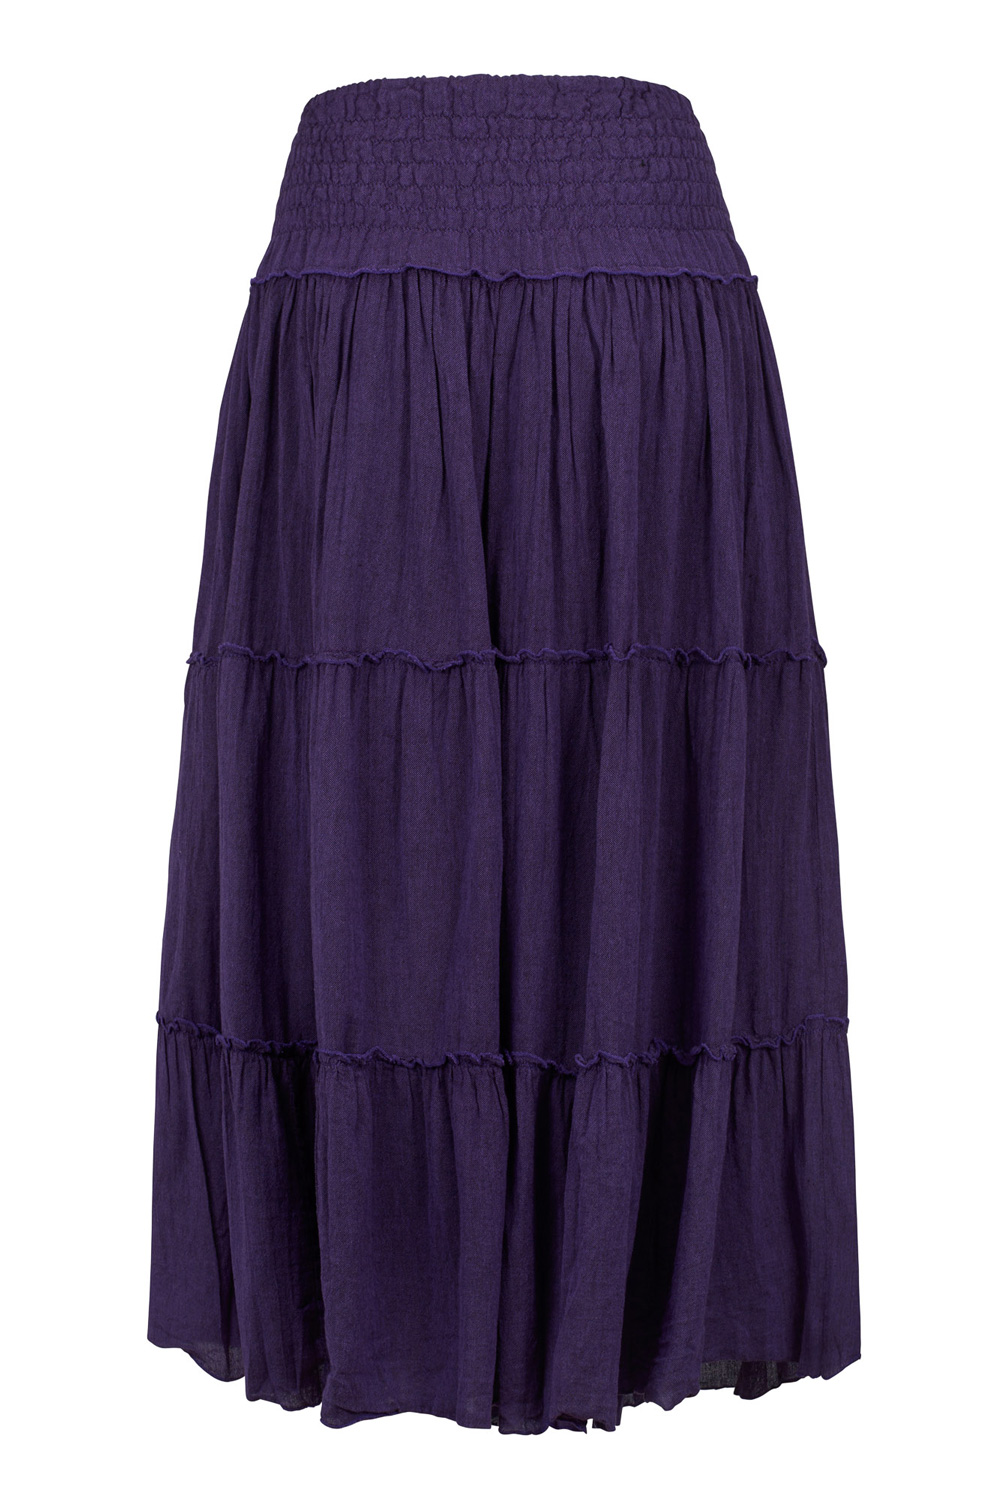 Wicked Dragon Clothing - Tiered maxi skirt with pockets